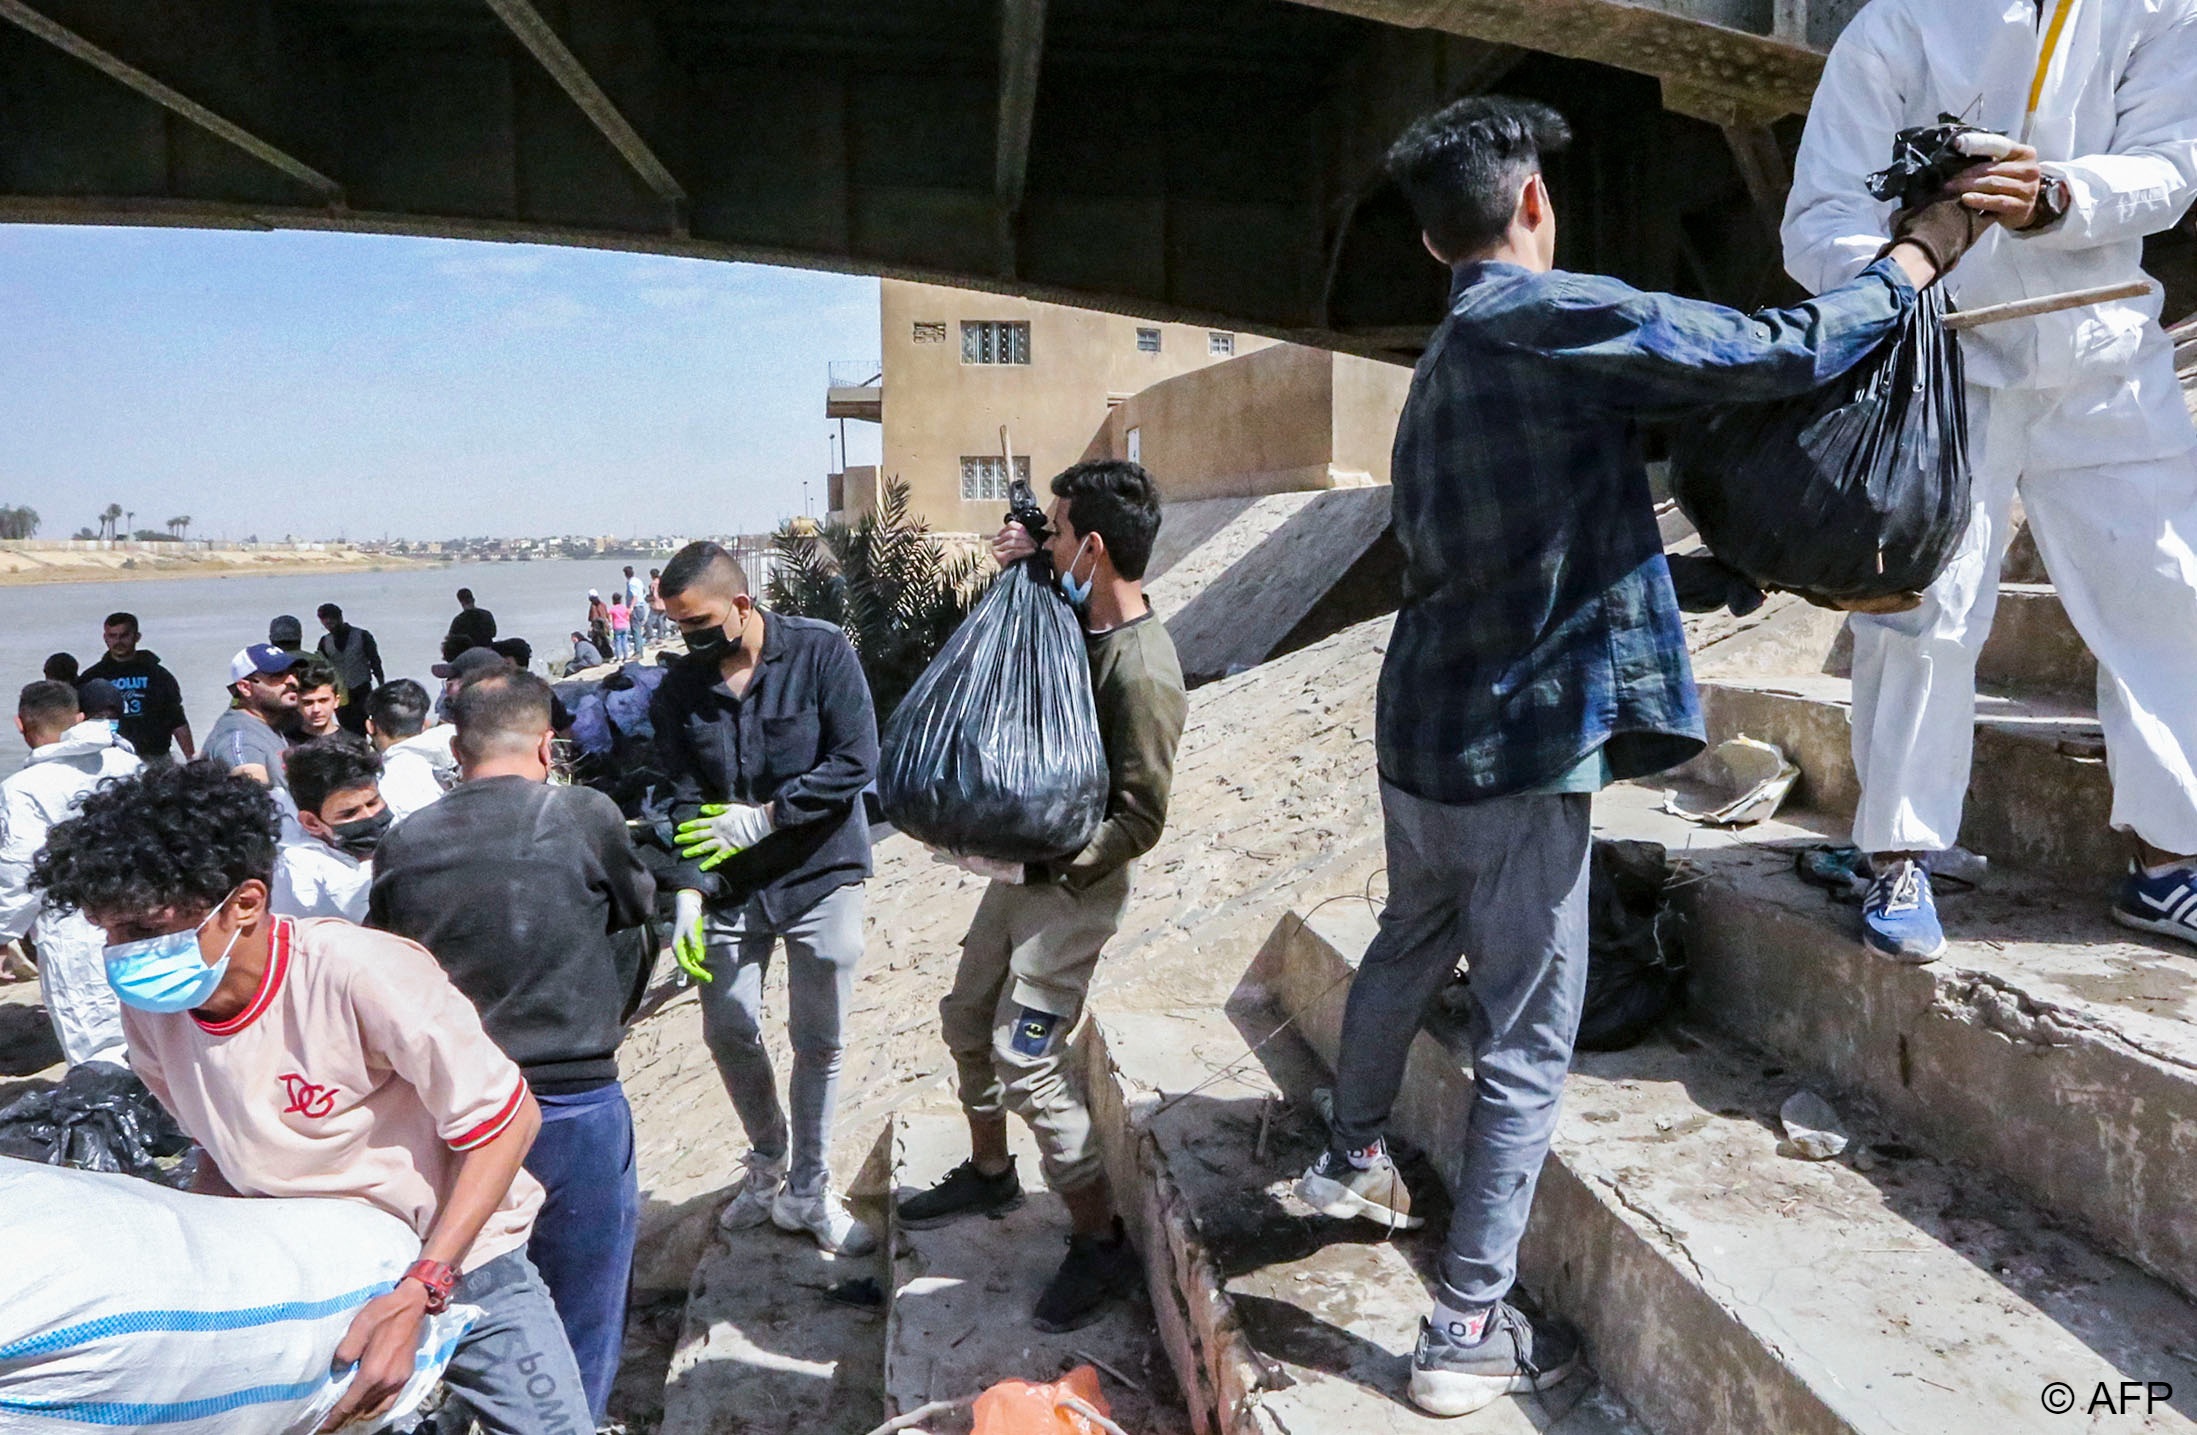 The 200 volunteers want to make a difference, but face a Herculean task in a country where trash is commonly dropped on the ground (photo: Sabah ARAR AFP)